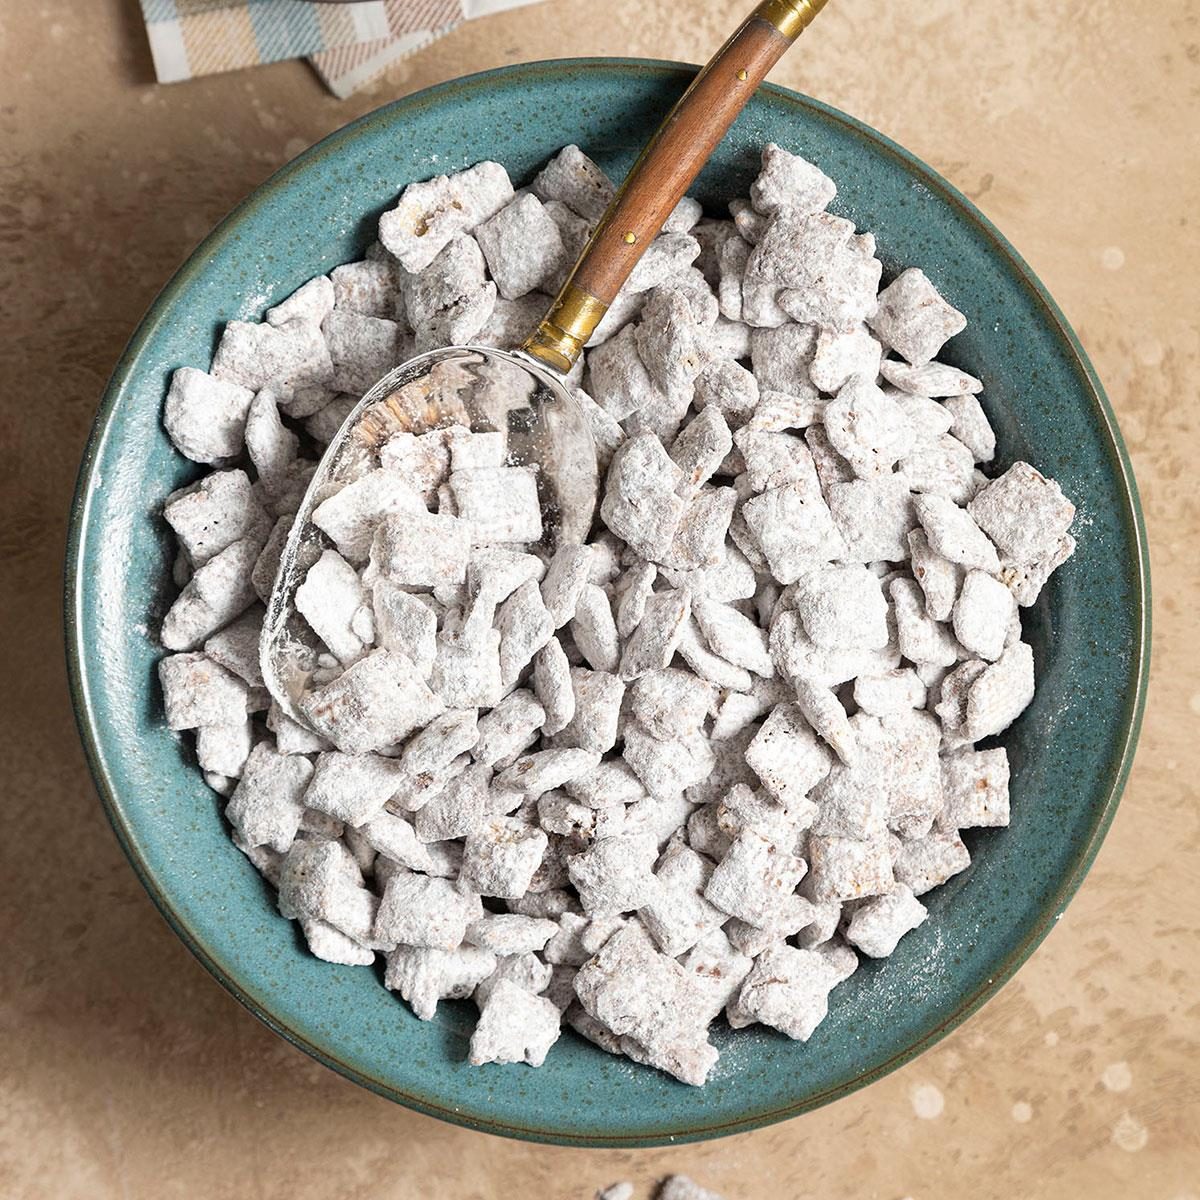 Easy Puppy Chow Exps Ft23 247121 St 1207 1